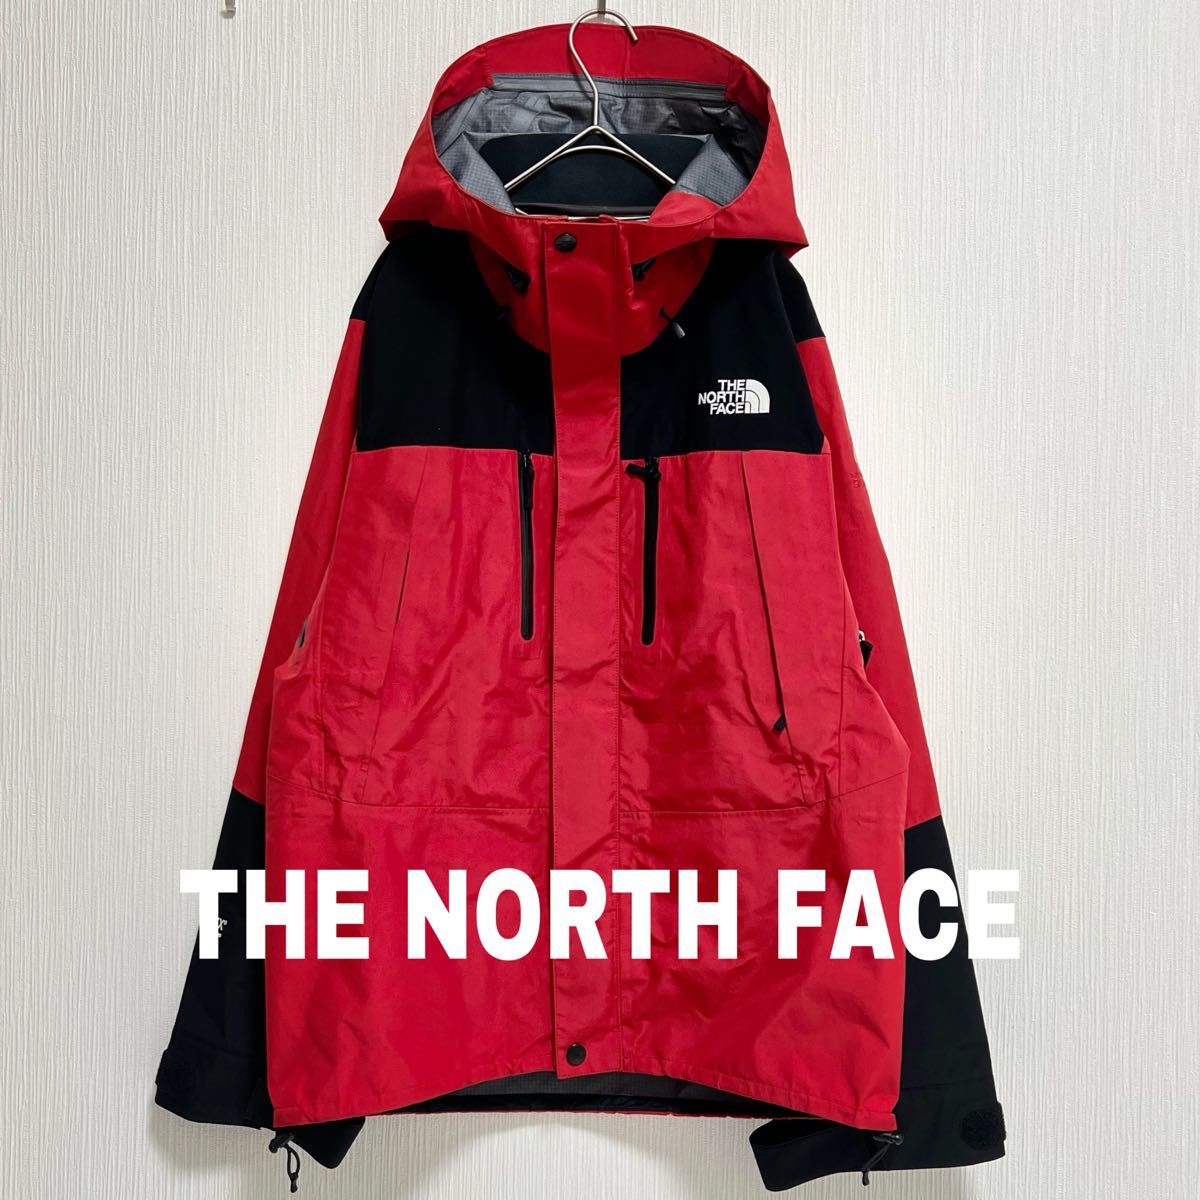 the north face gore-tex 赤の新品・未使用品・中古品｜PayPayフリマ